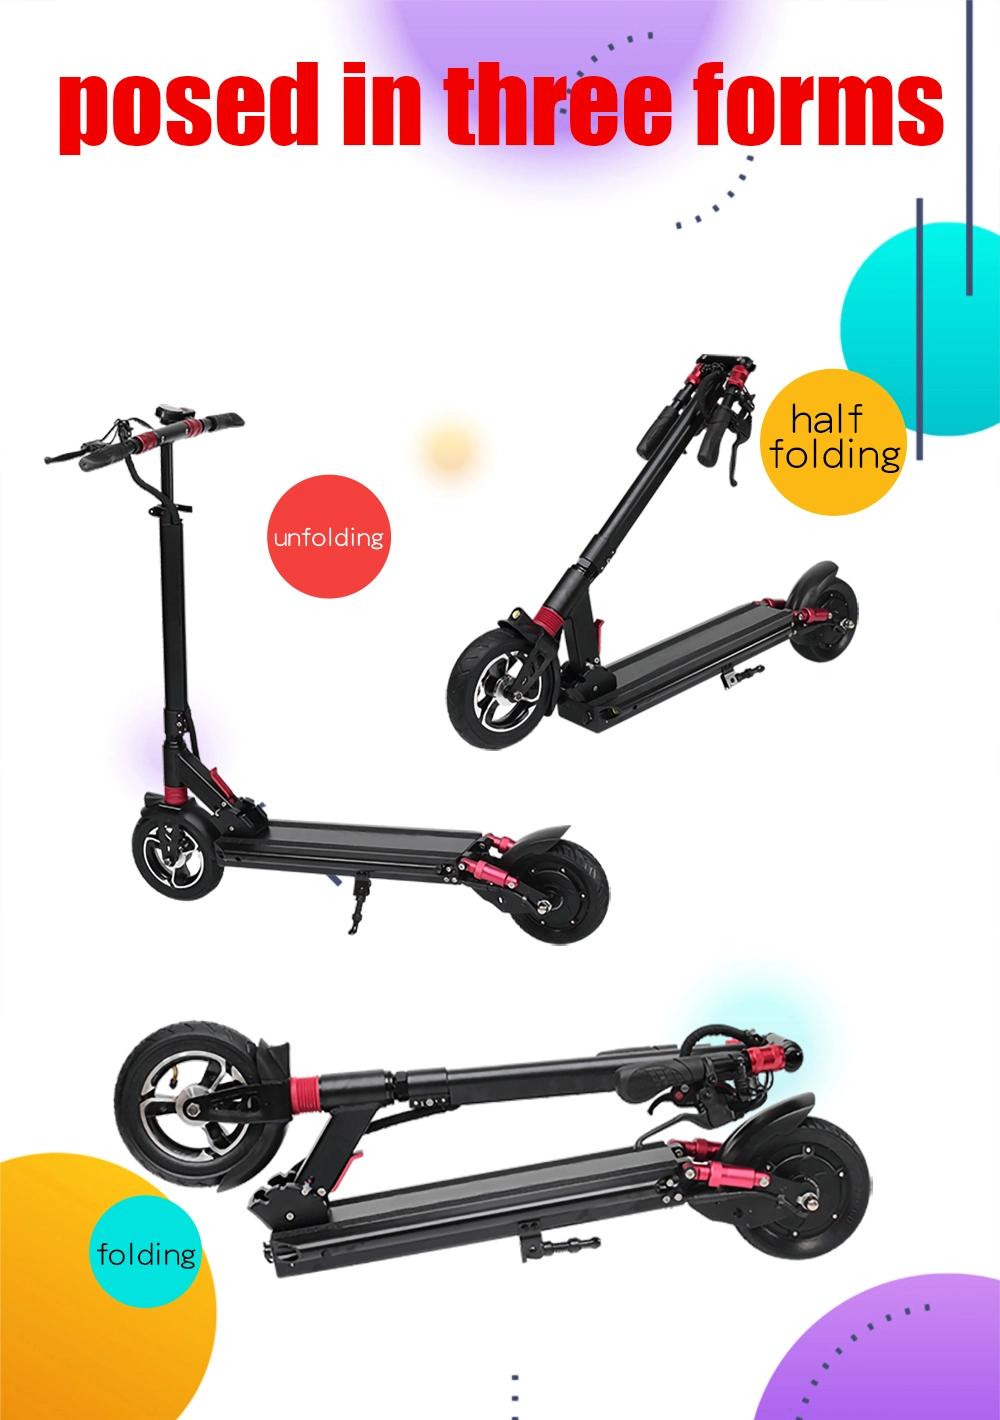 off Road Lithium Battery Foldable E Scooter Mobility Scooter Electric Mini Scooter Motorbike Scooter Electric Motorcycle